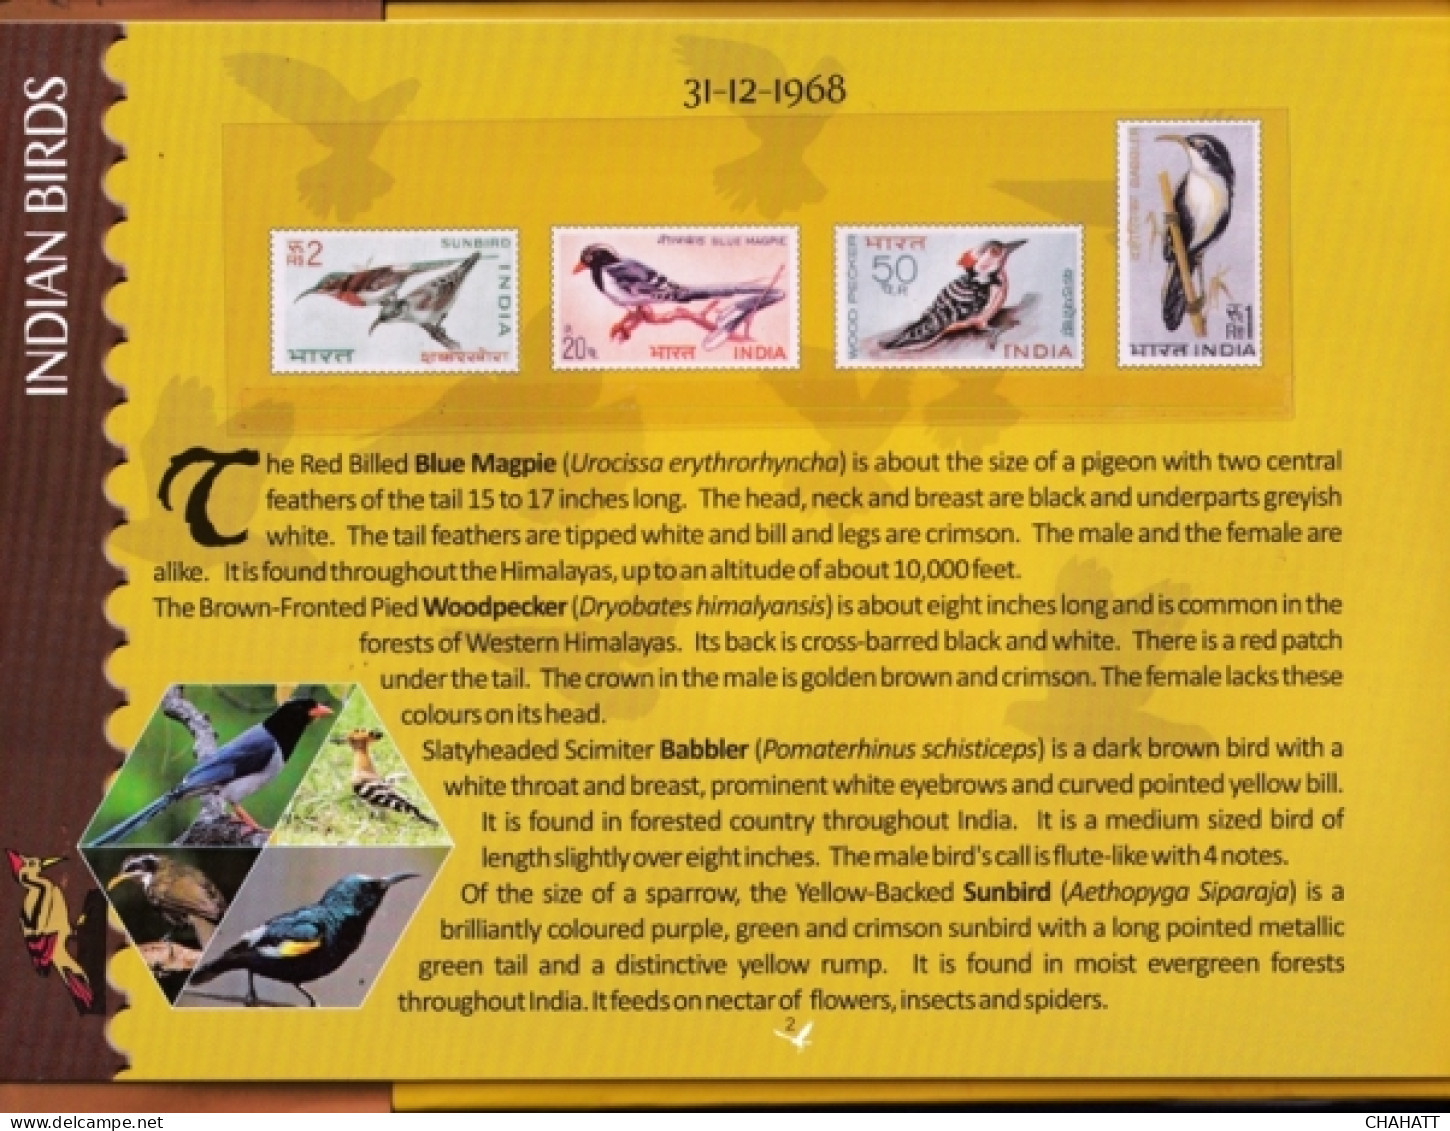 BIRDS OF INDIA- STAMP ALBUM- BEAUTIFULLY CURATED STAMP ALBUM WITH SPACE FOR STAMPS- ILLUSTRATED-BX4-36 - Vita Selvaggia